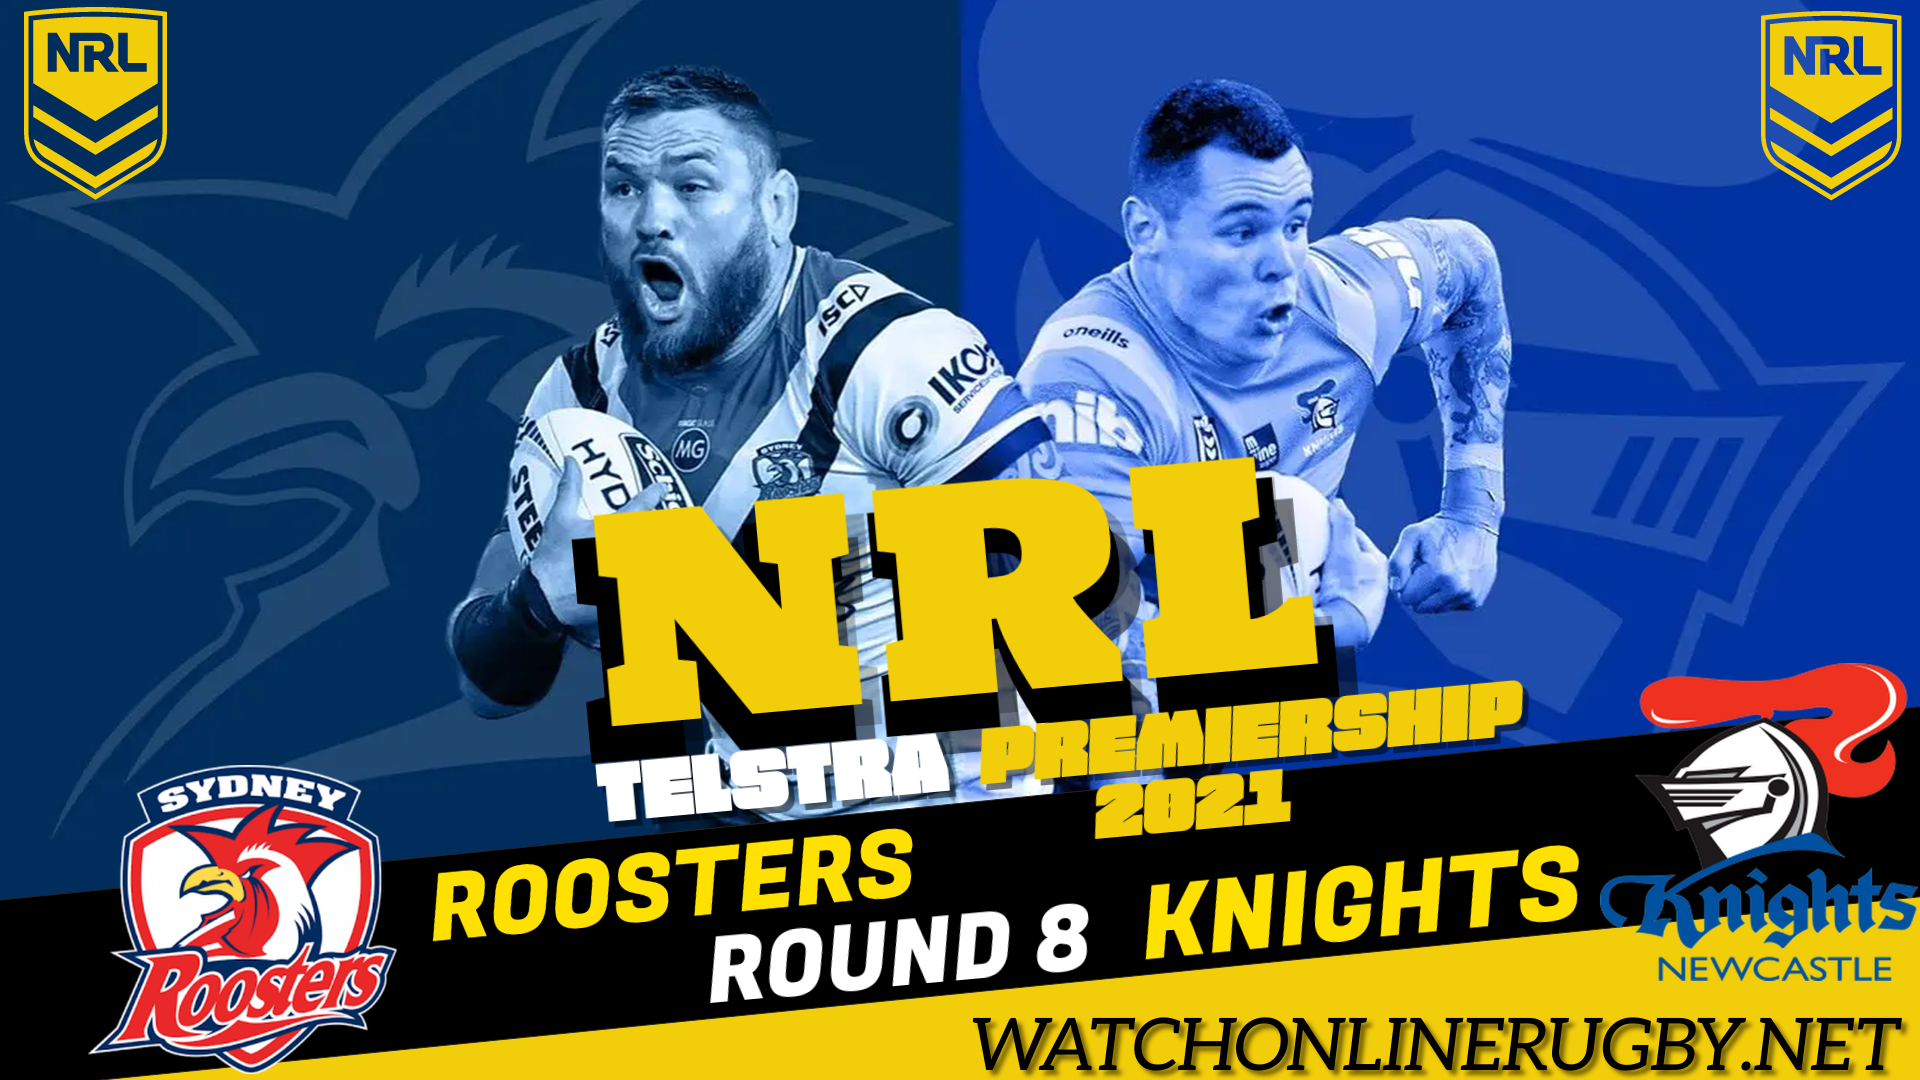 roosters-vs-knights-live-stream